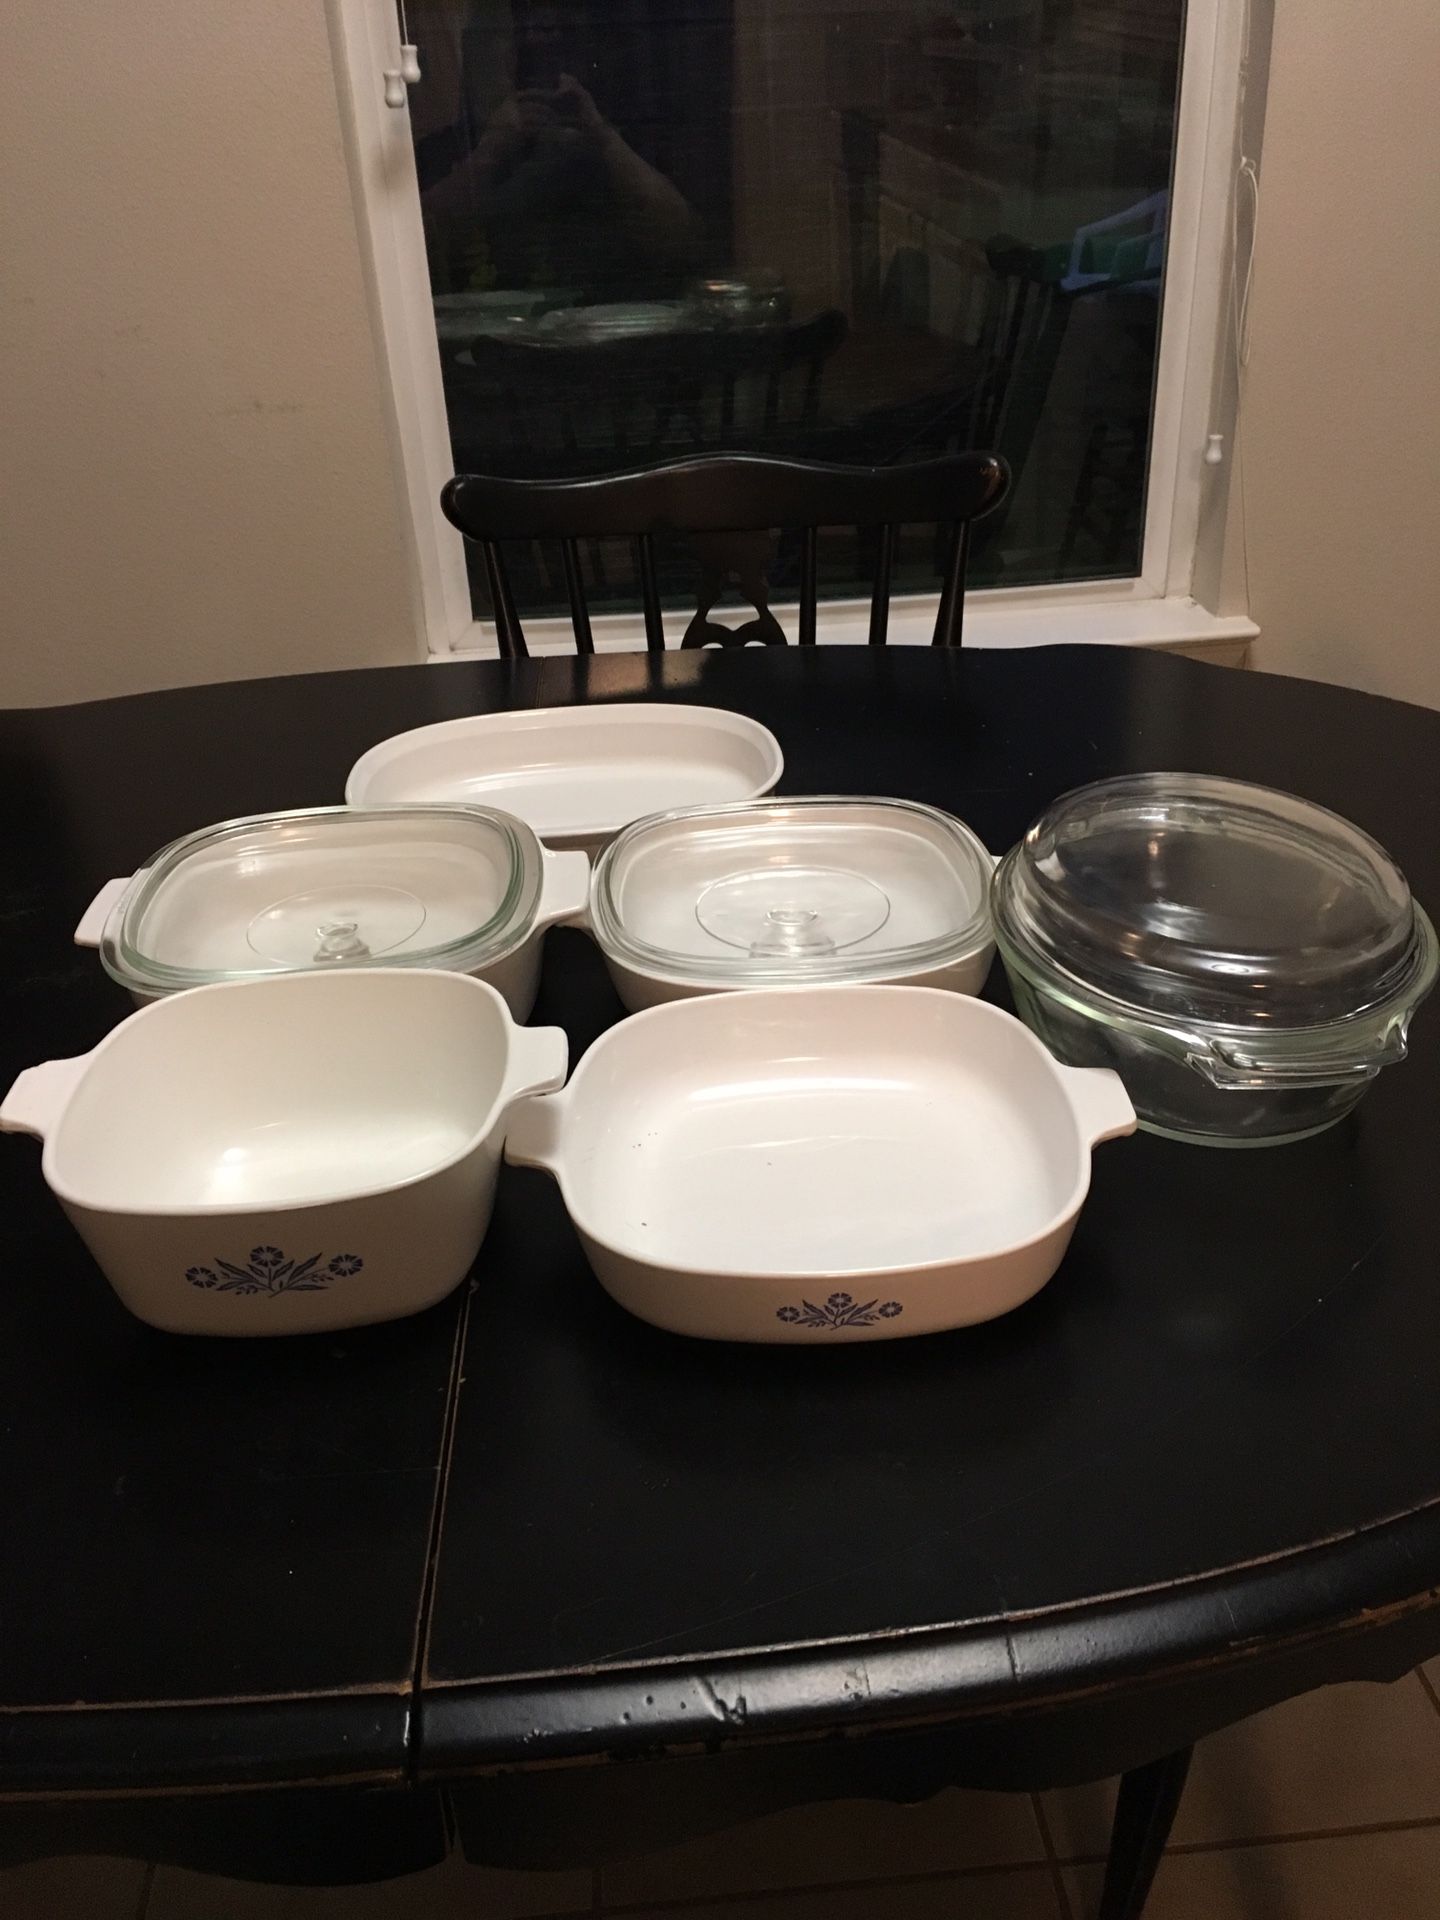 Pyrex and corning ware - 9 pieces